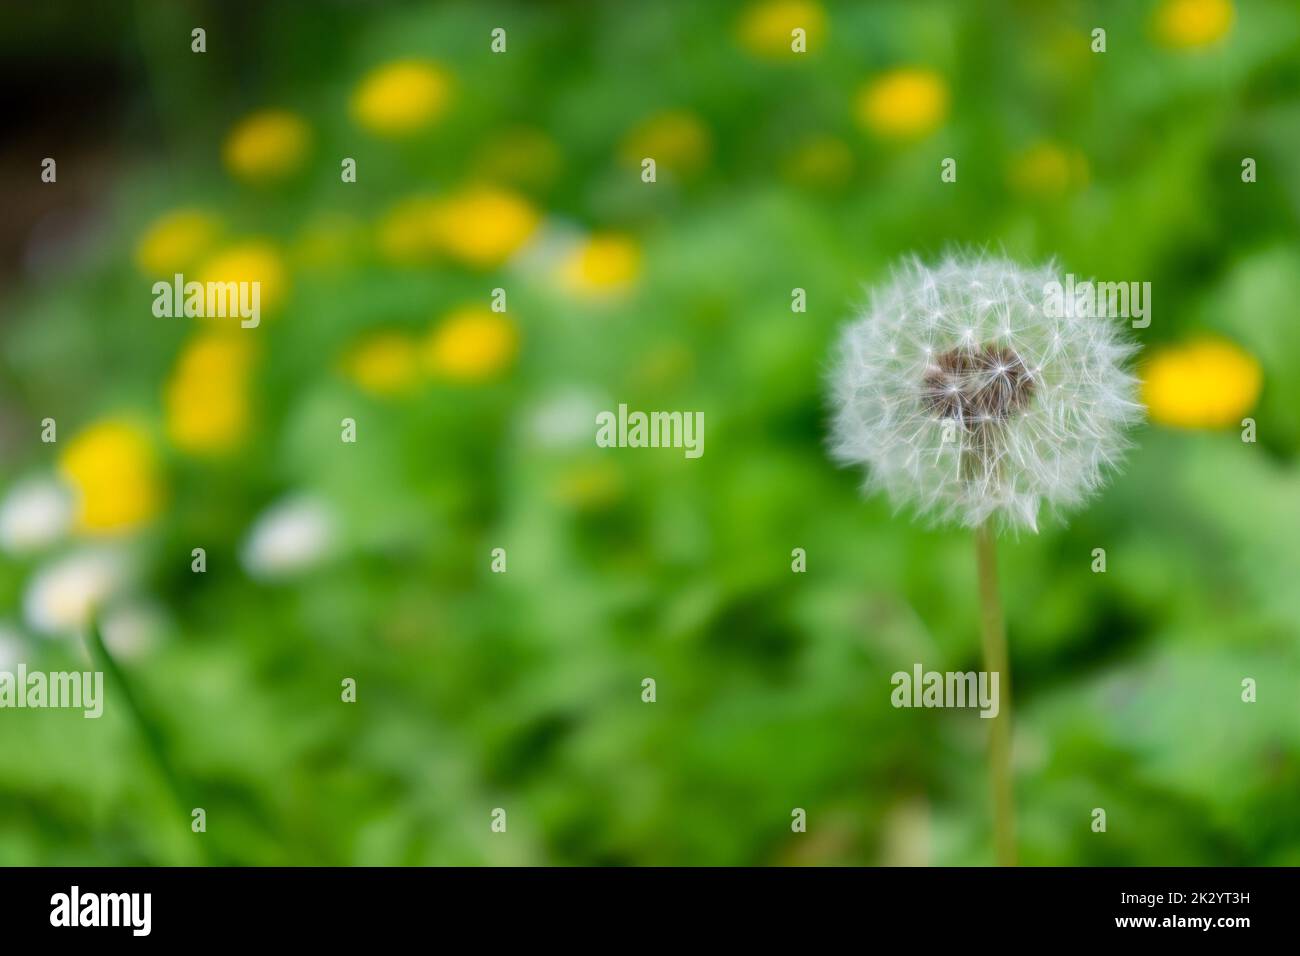 Full dandelion clock set in front of an out of focus buttercup bed showing up as soft yellow within a sea of green. Stock Photo